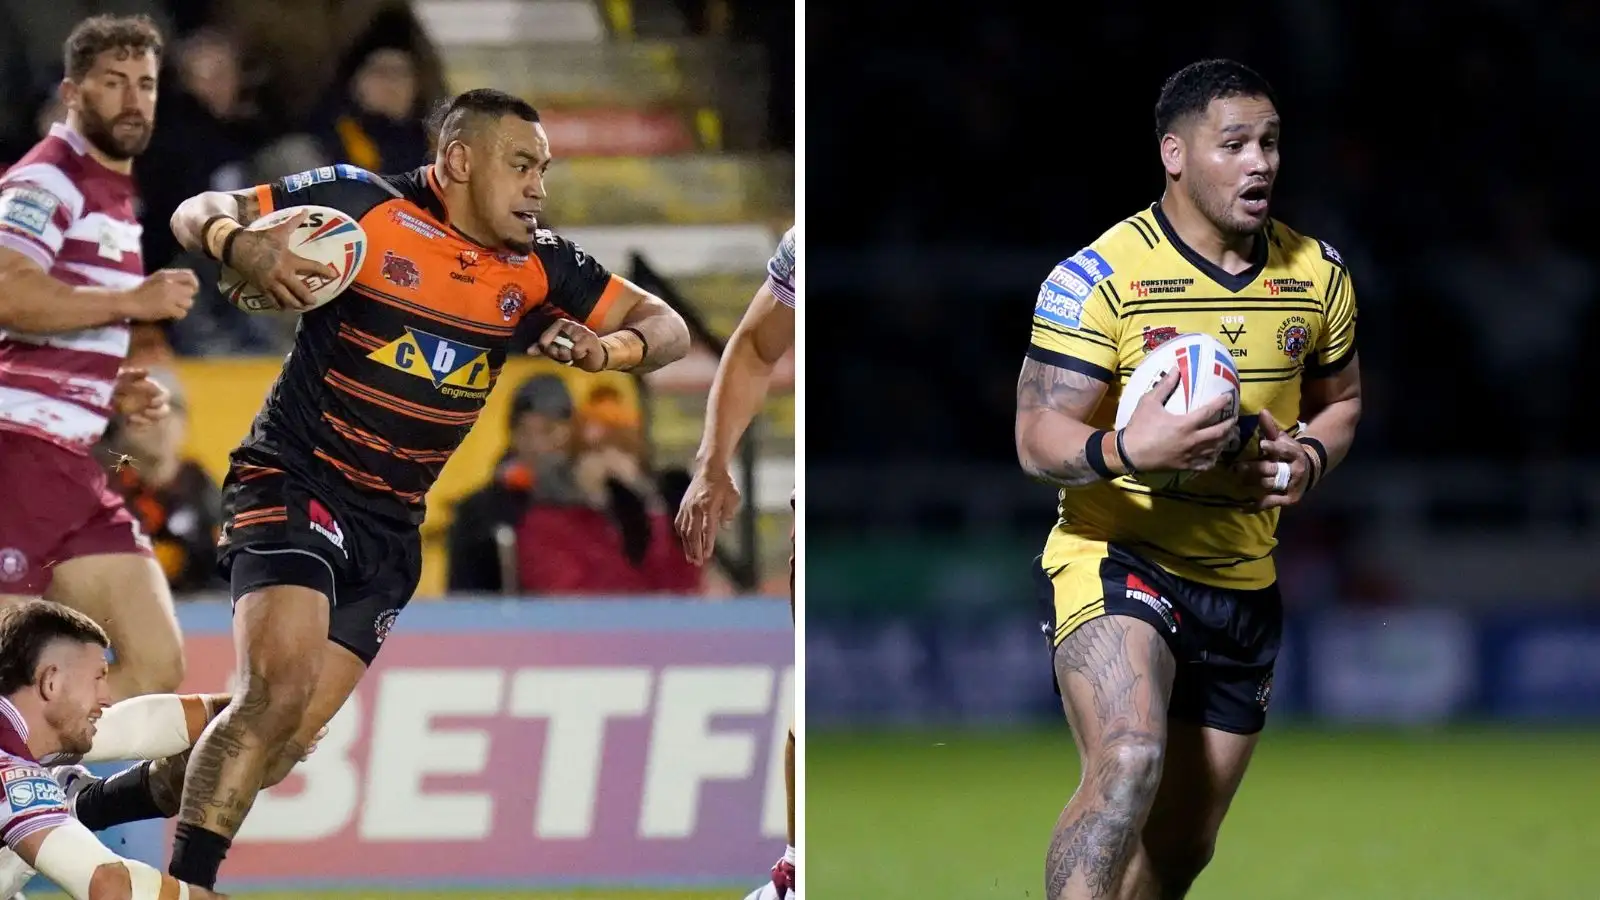 Castleford Tigers announce immediate departures of overseas duo